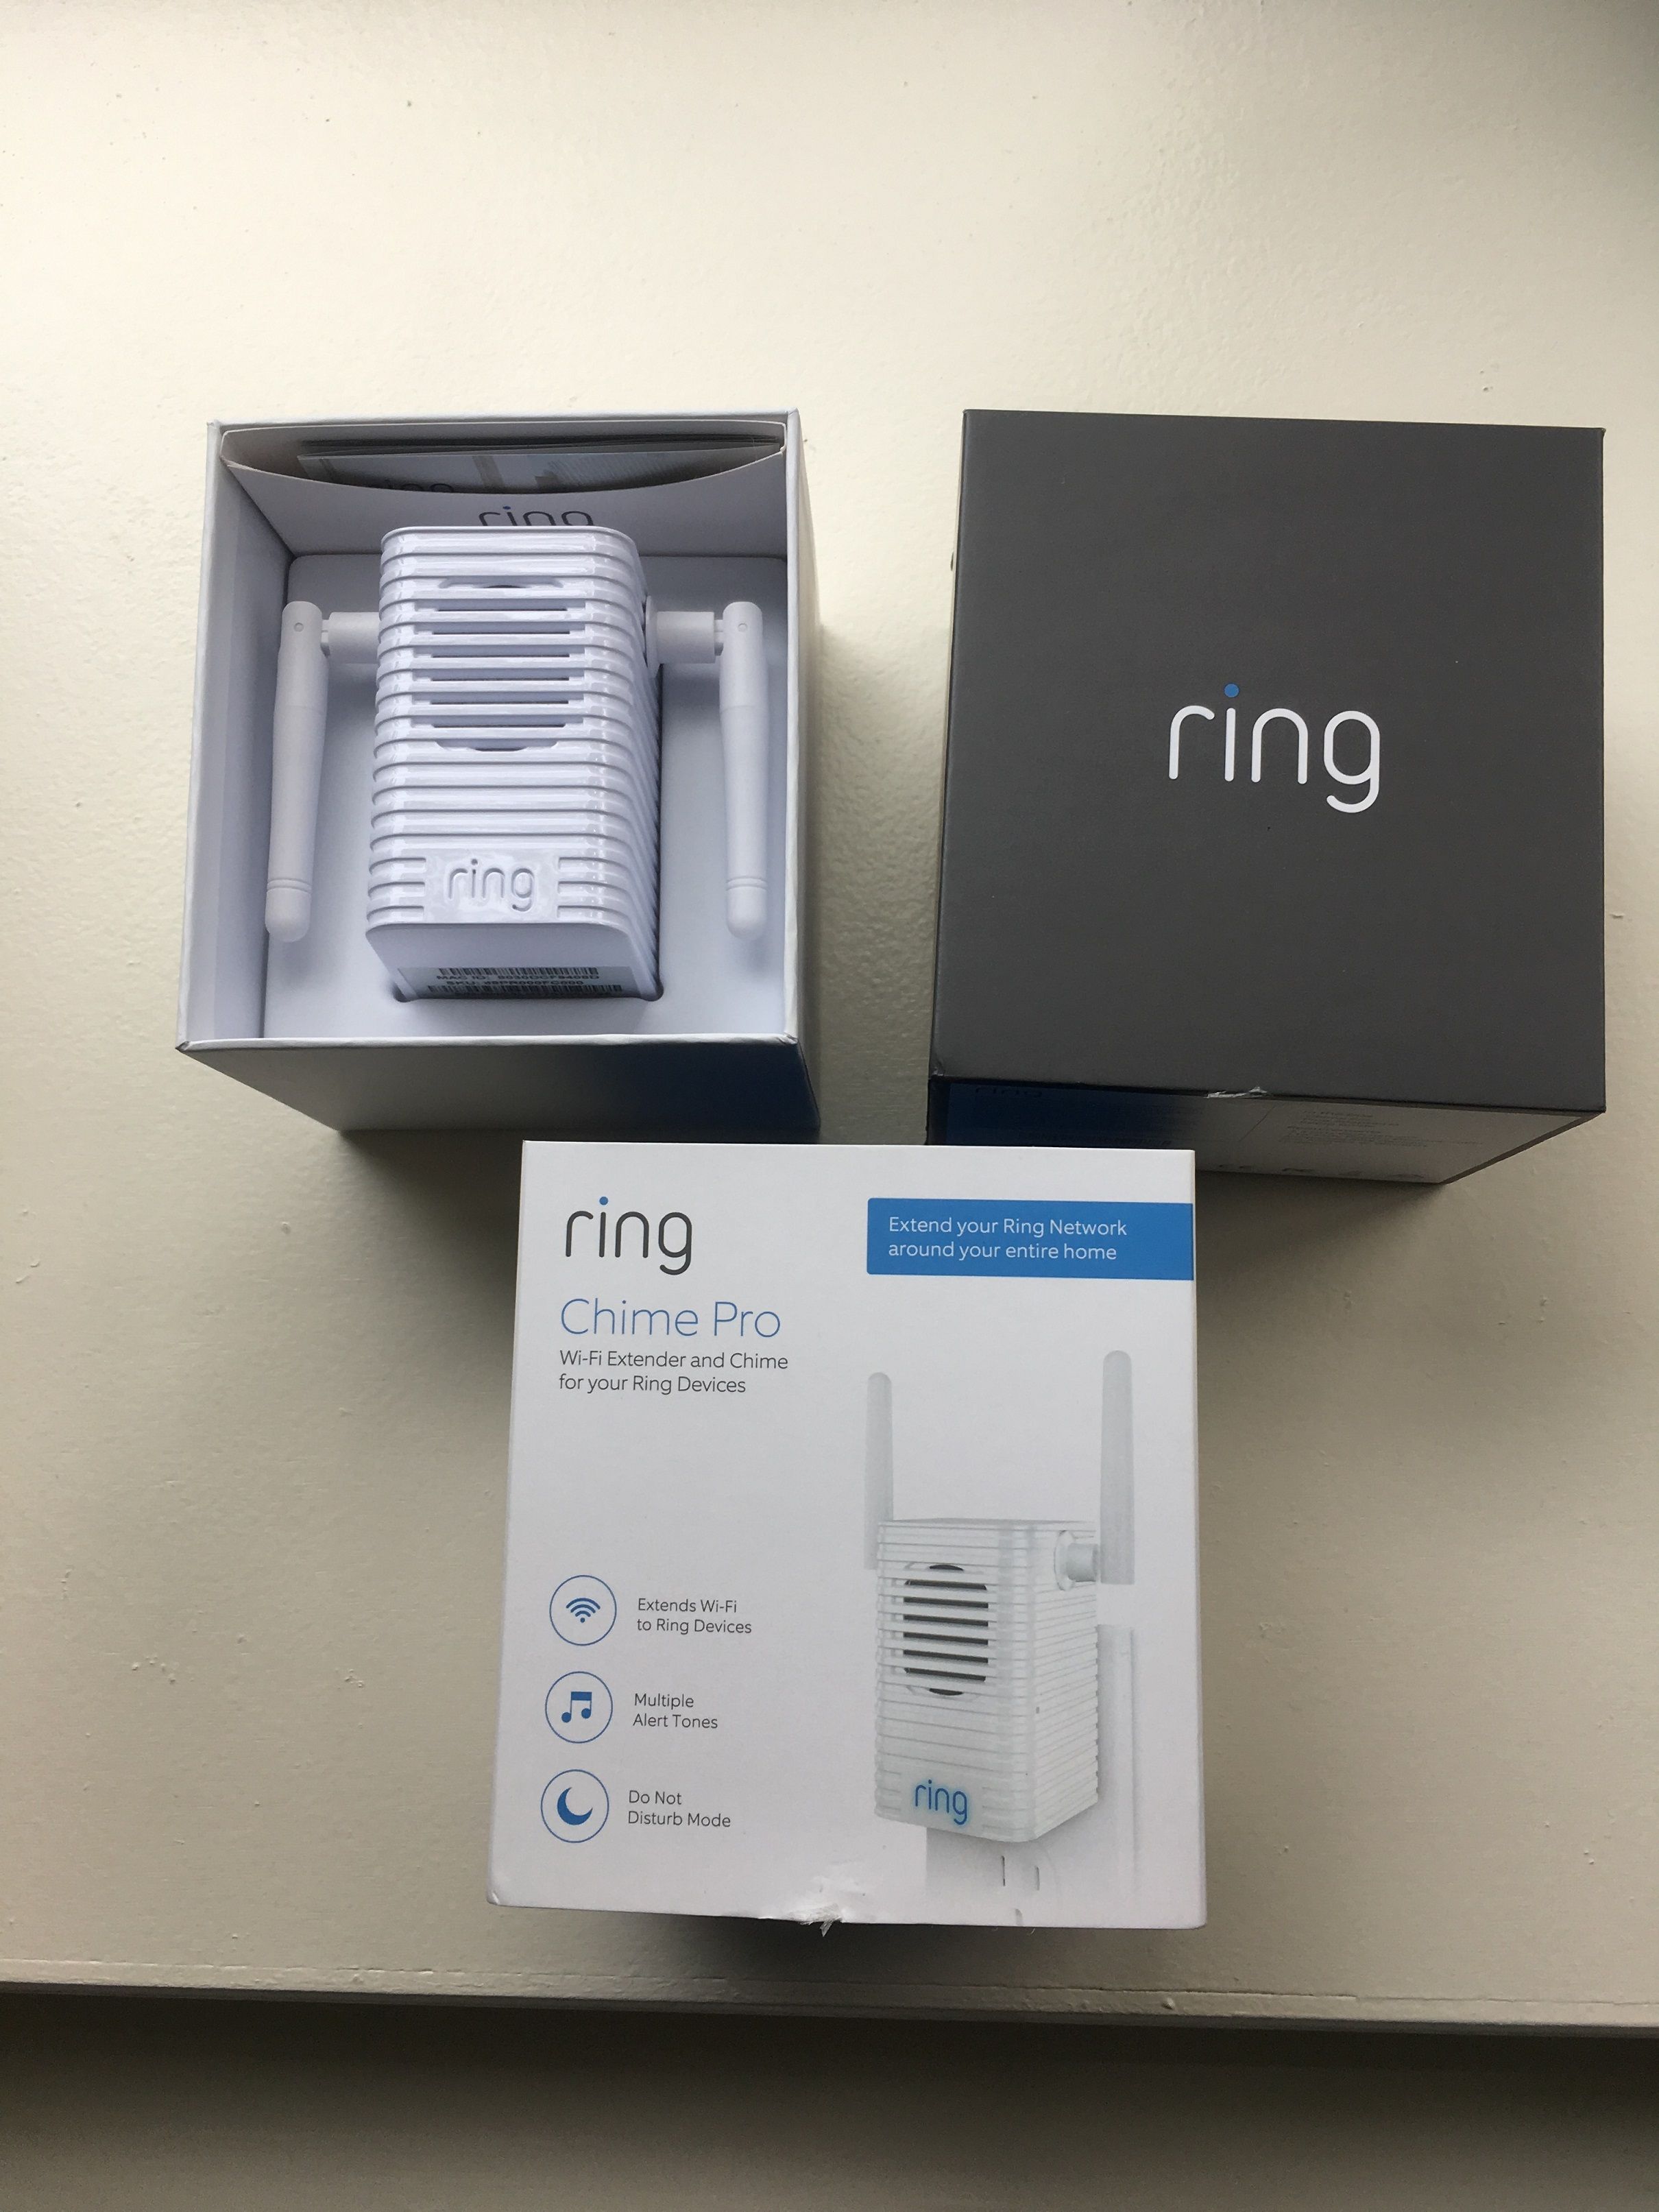 ring video doorbell and chime